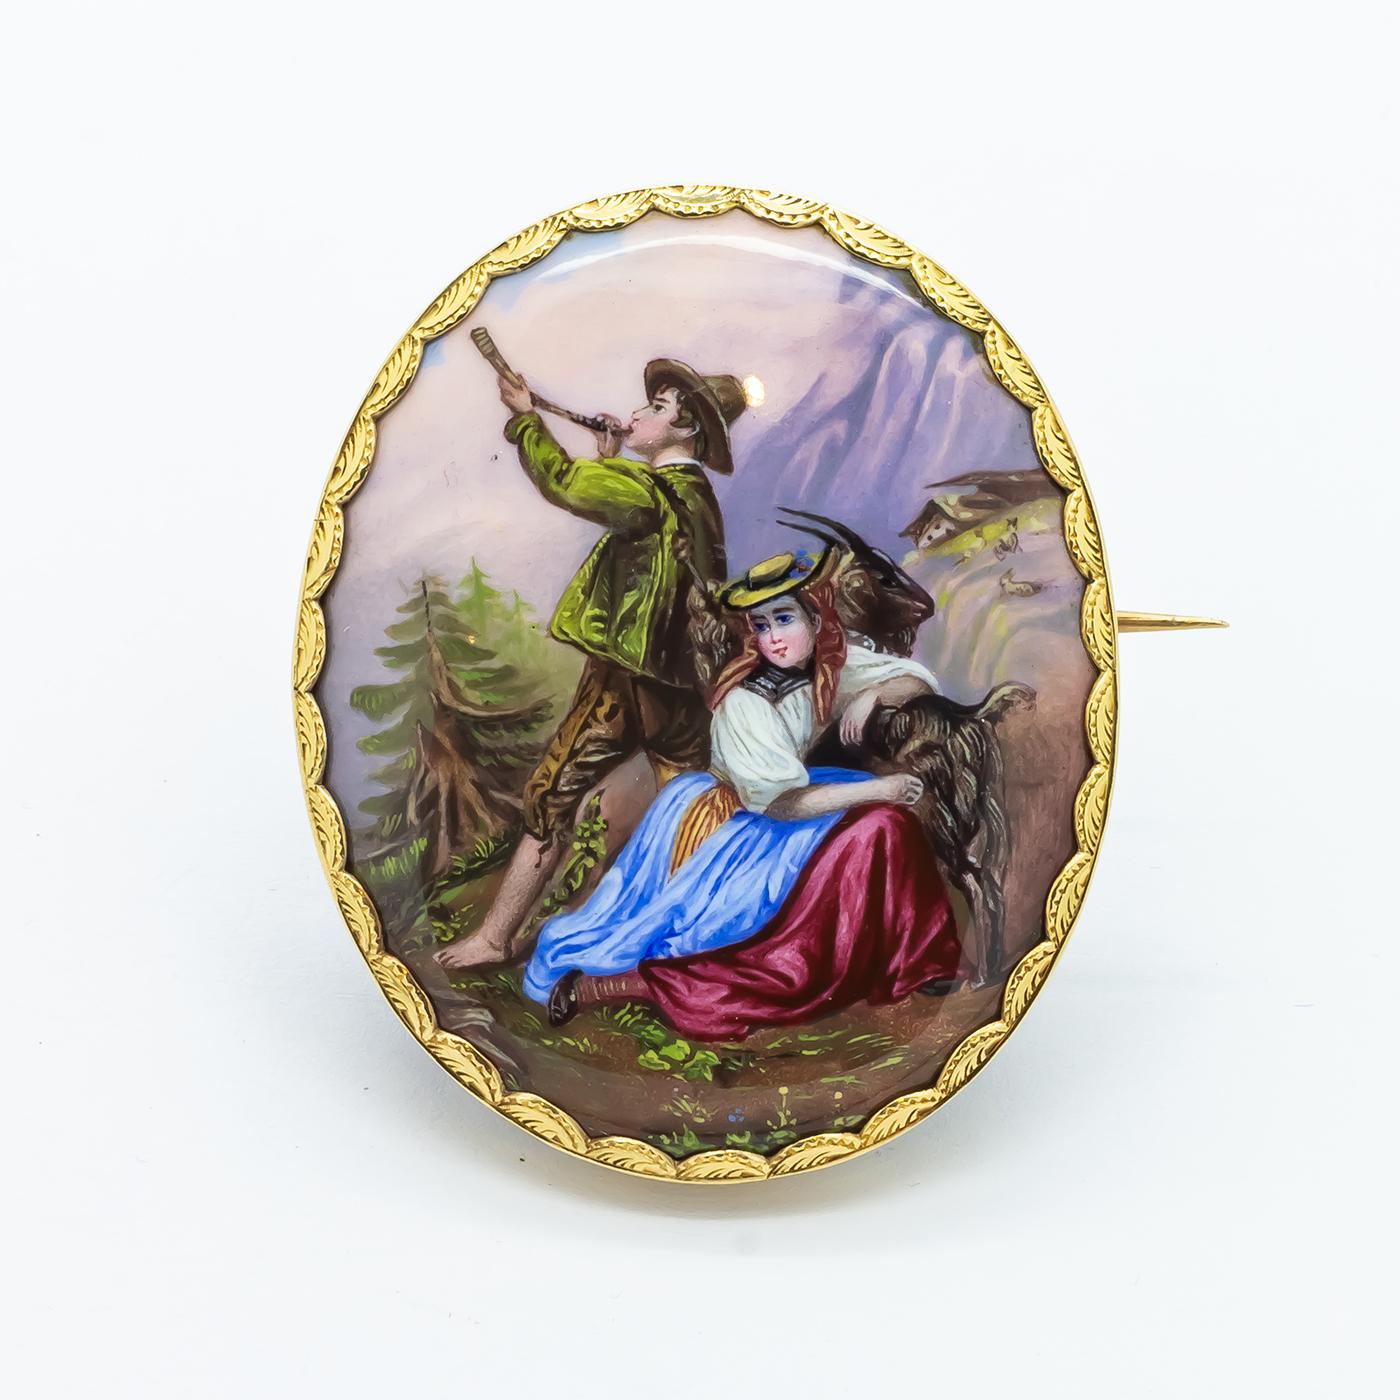 An antique, Swiss enamel brooch, showing a mountain scene, with a woman, in regional peasant dress, leaning on a goat and man blowing a horn, with goats and a chalet in the background, on hand painted enamelled plaque, mounted in gold, with a